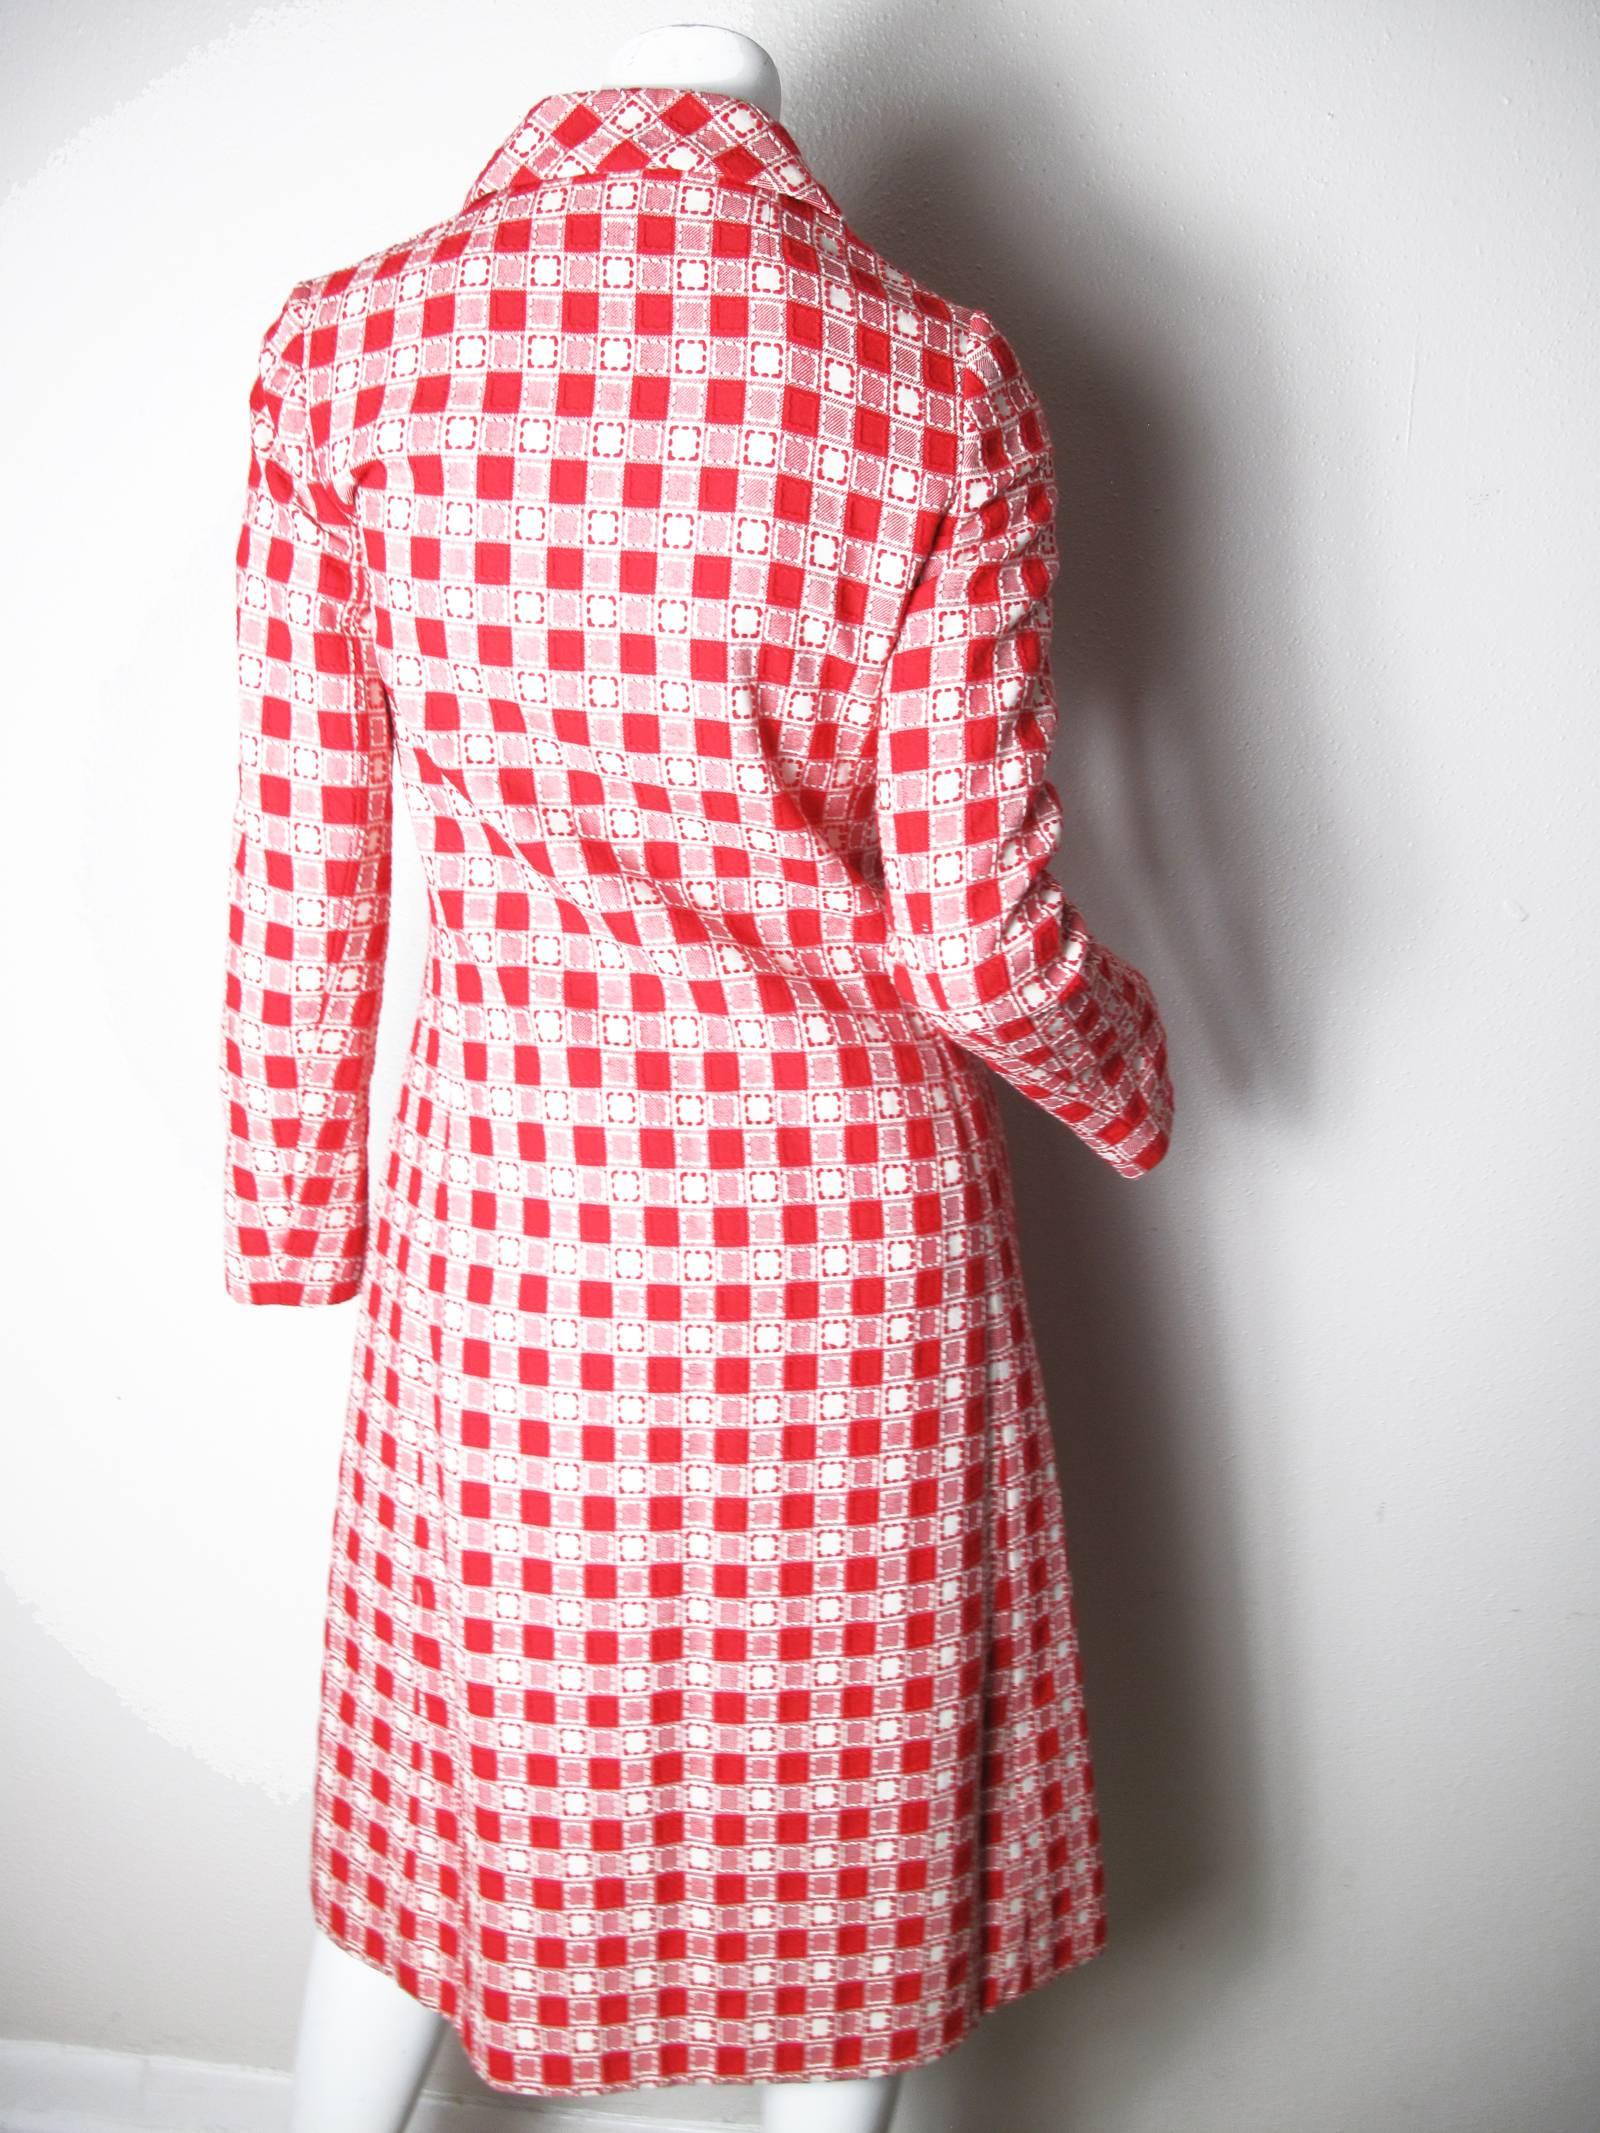 1960s Givenchy red and off white square printed coat and skirt.  Condition: Excellent. Size 38 / or current 4 - 6 
Coat: 35